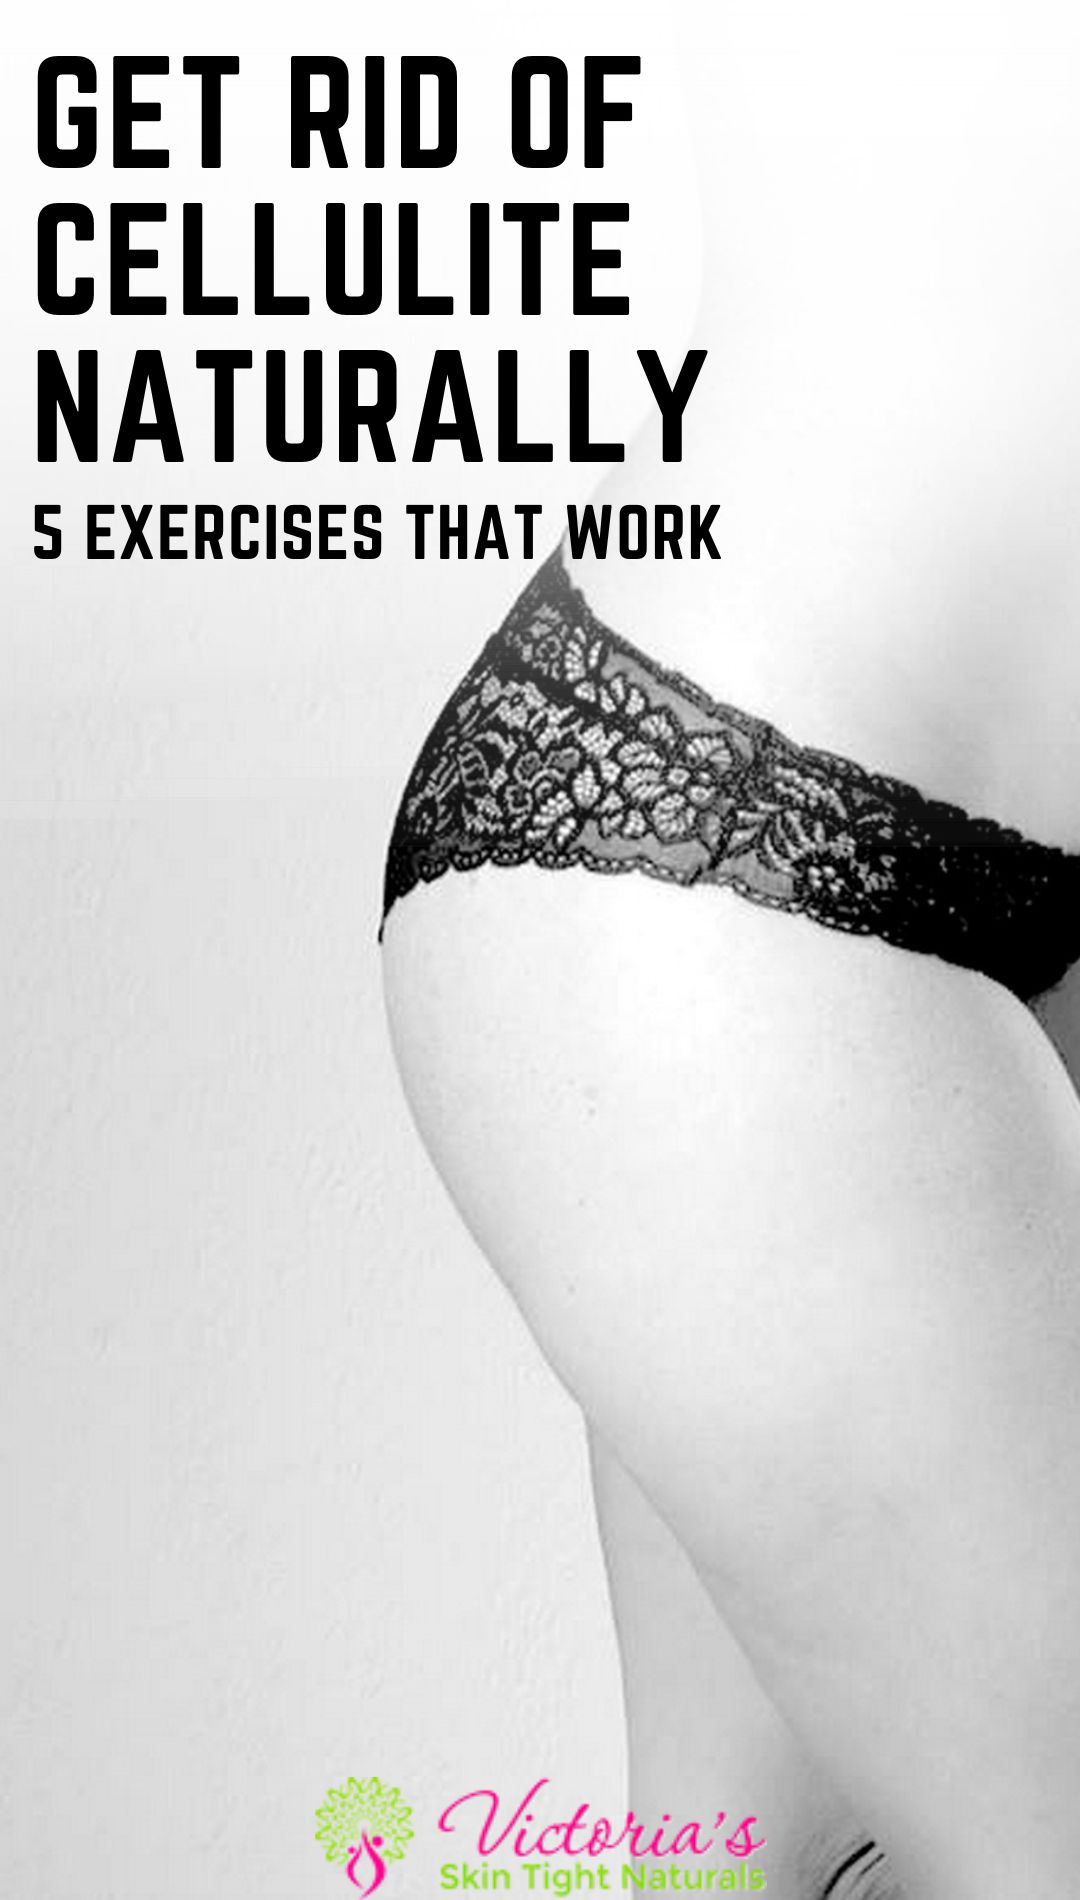 The Best Anti-Cellulite Workout